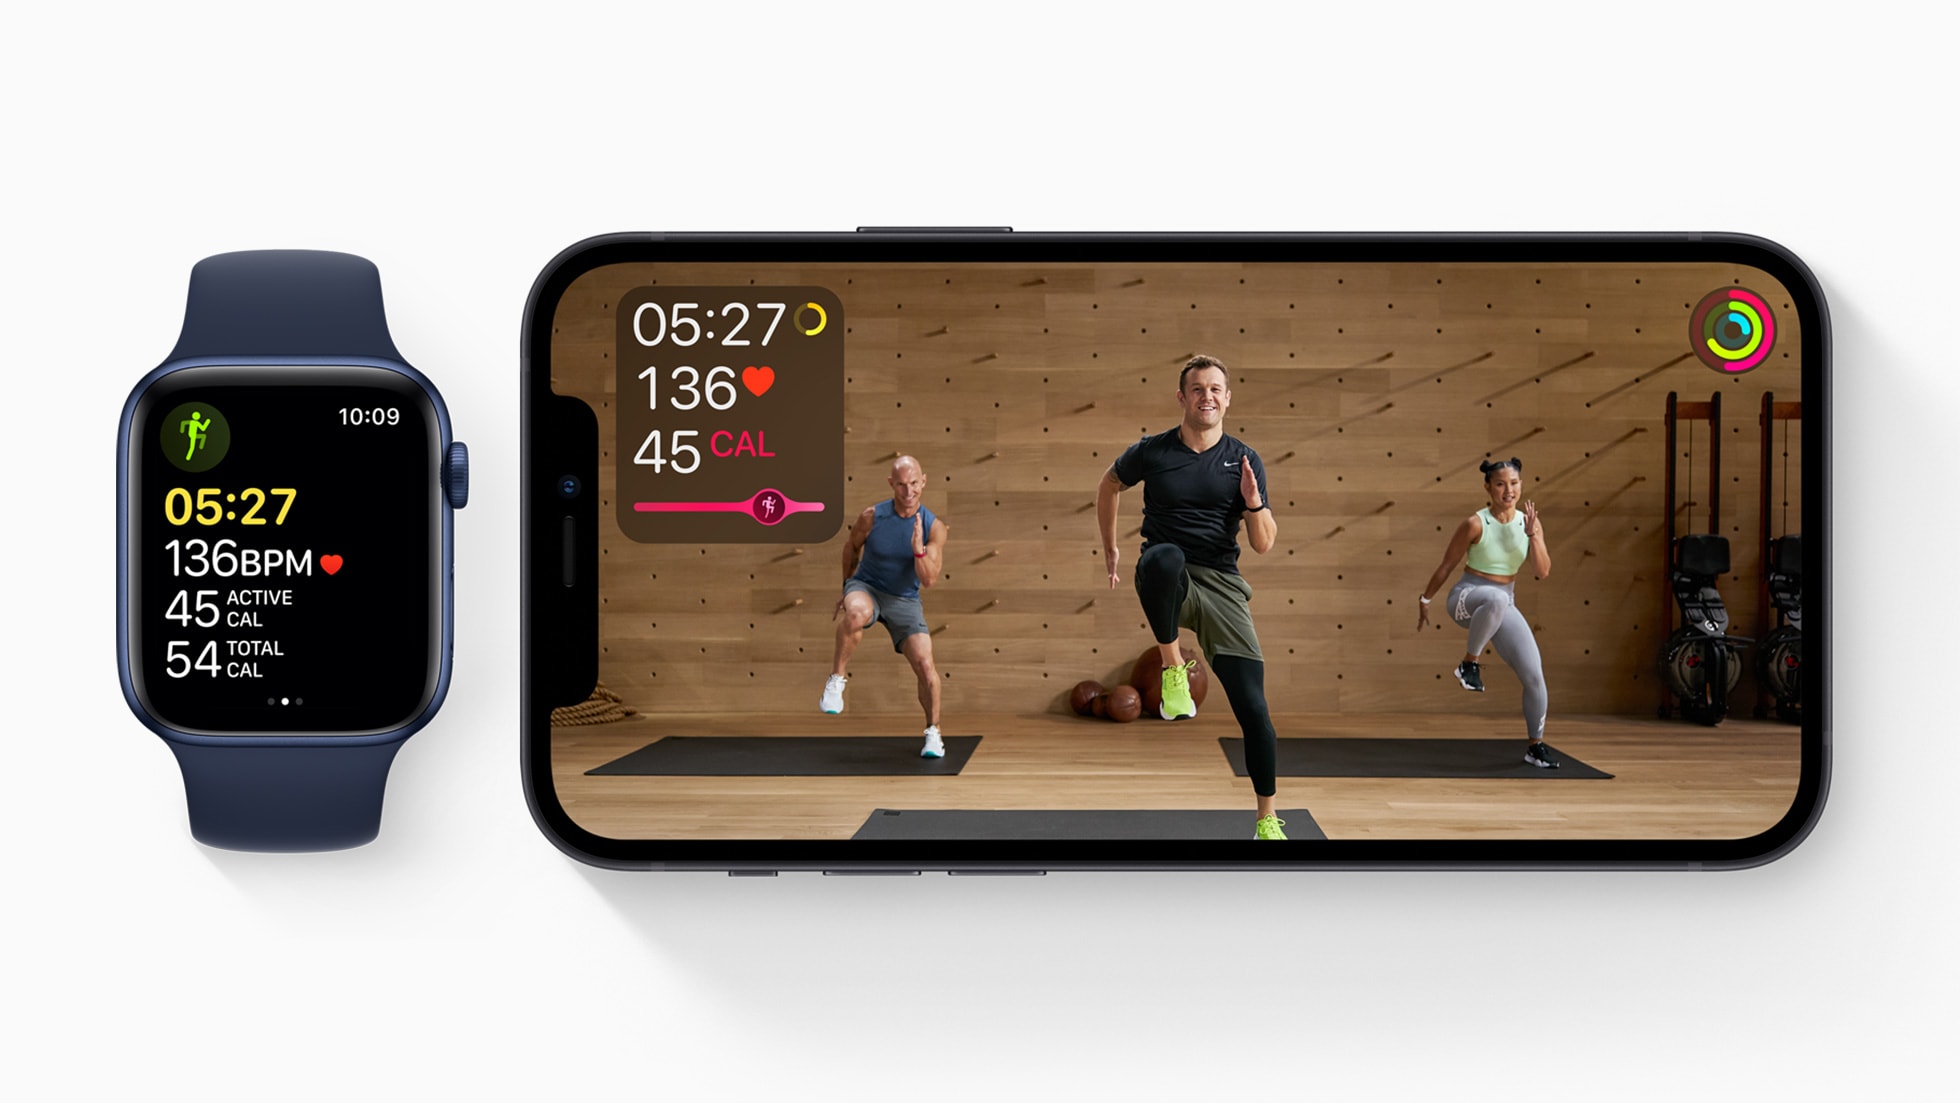 Apple Fitness+ review: Apple Watch integration gives the new subscription service a crucial advantage. But is your iPhone really big enough for workouts?